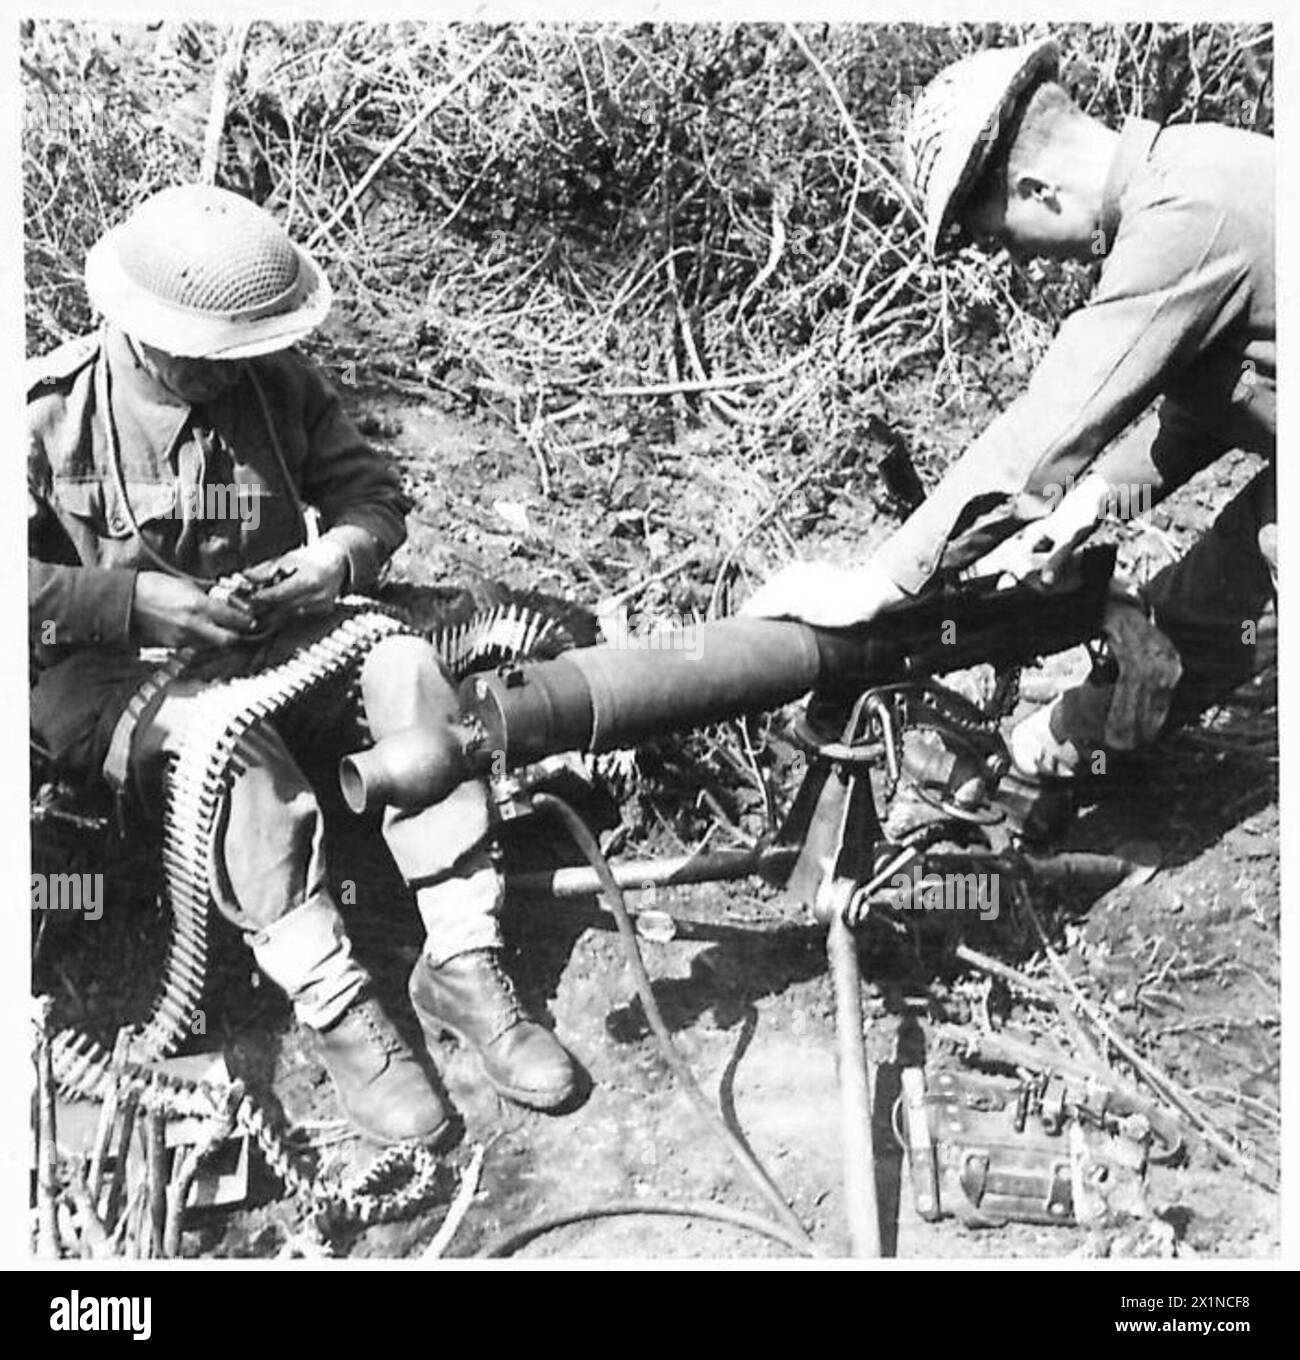 THE BRITISH ARMY IN NORTH AFRICA, SICILY, ITALY, THE BALKANS AND AUSTRIA 1942-1946 - Machine gun maintenance, Pte. A. Gardiner of Normanton Avenue, Sheldon, Birmingham, and L/Cpl. J. Drabble of Kingsway, Bollington, Macclesfield, Cheshire, check ammunition and sights of their Vickers gun, British Army Stock Photo